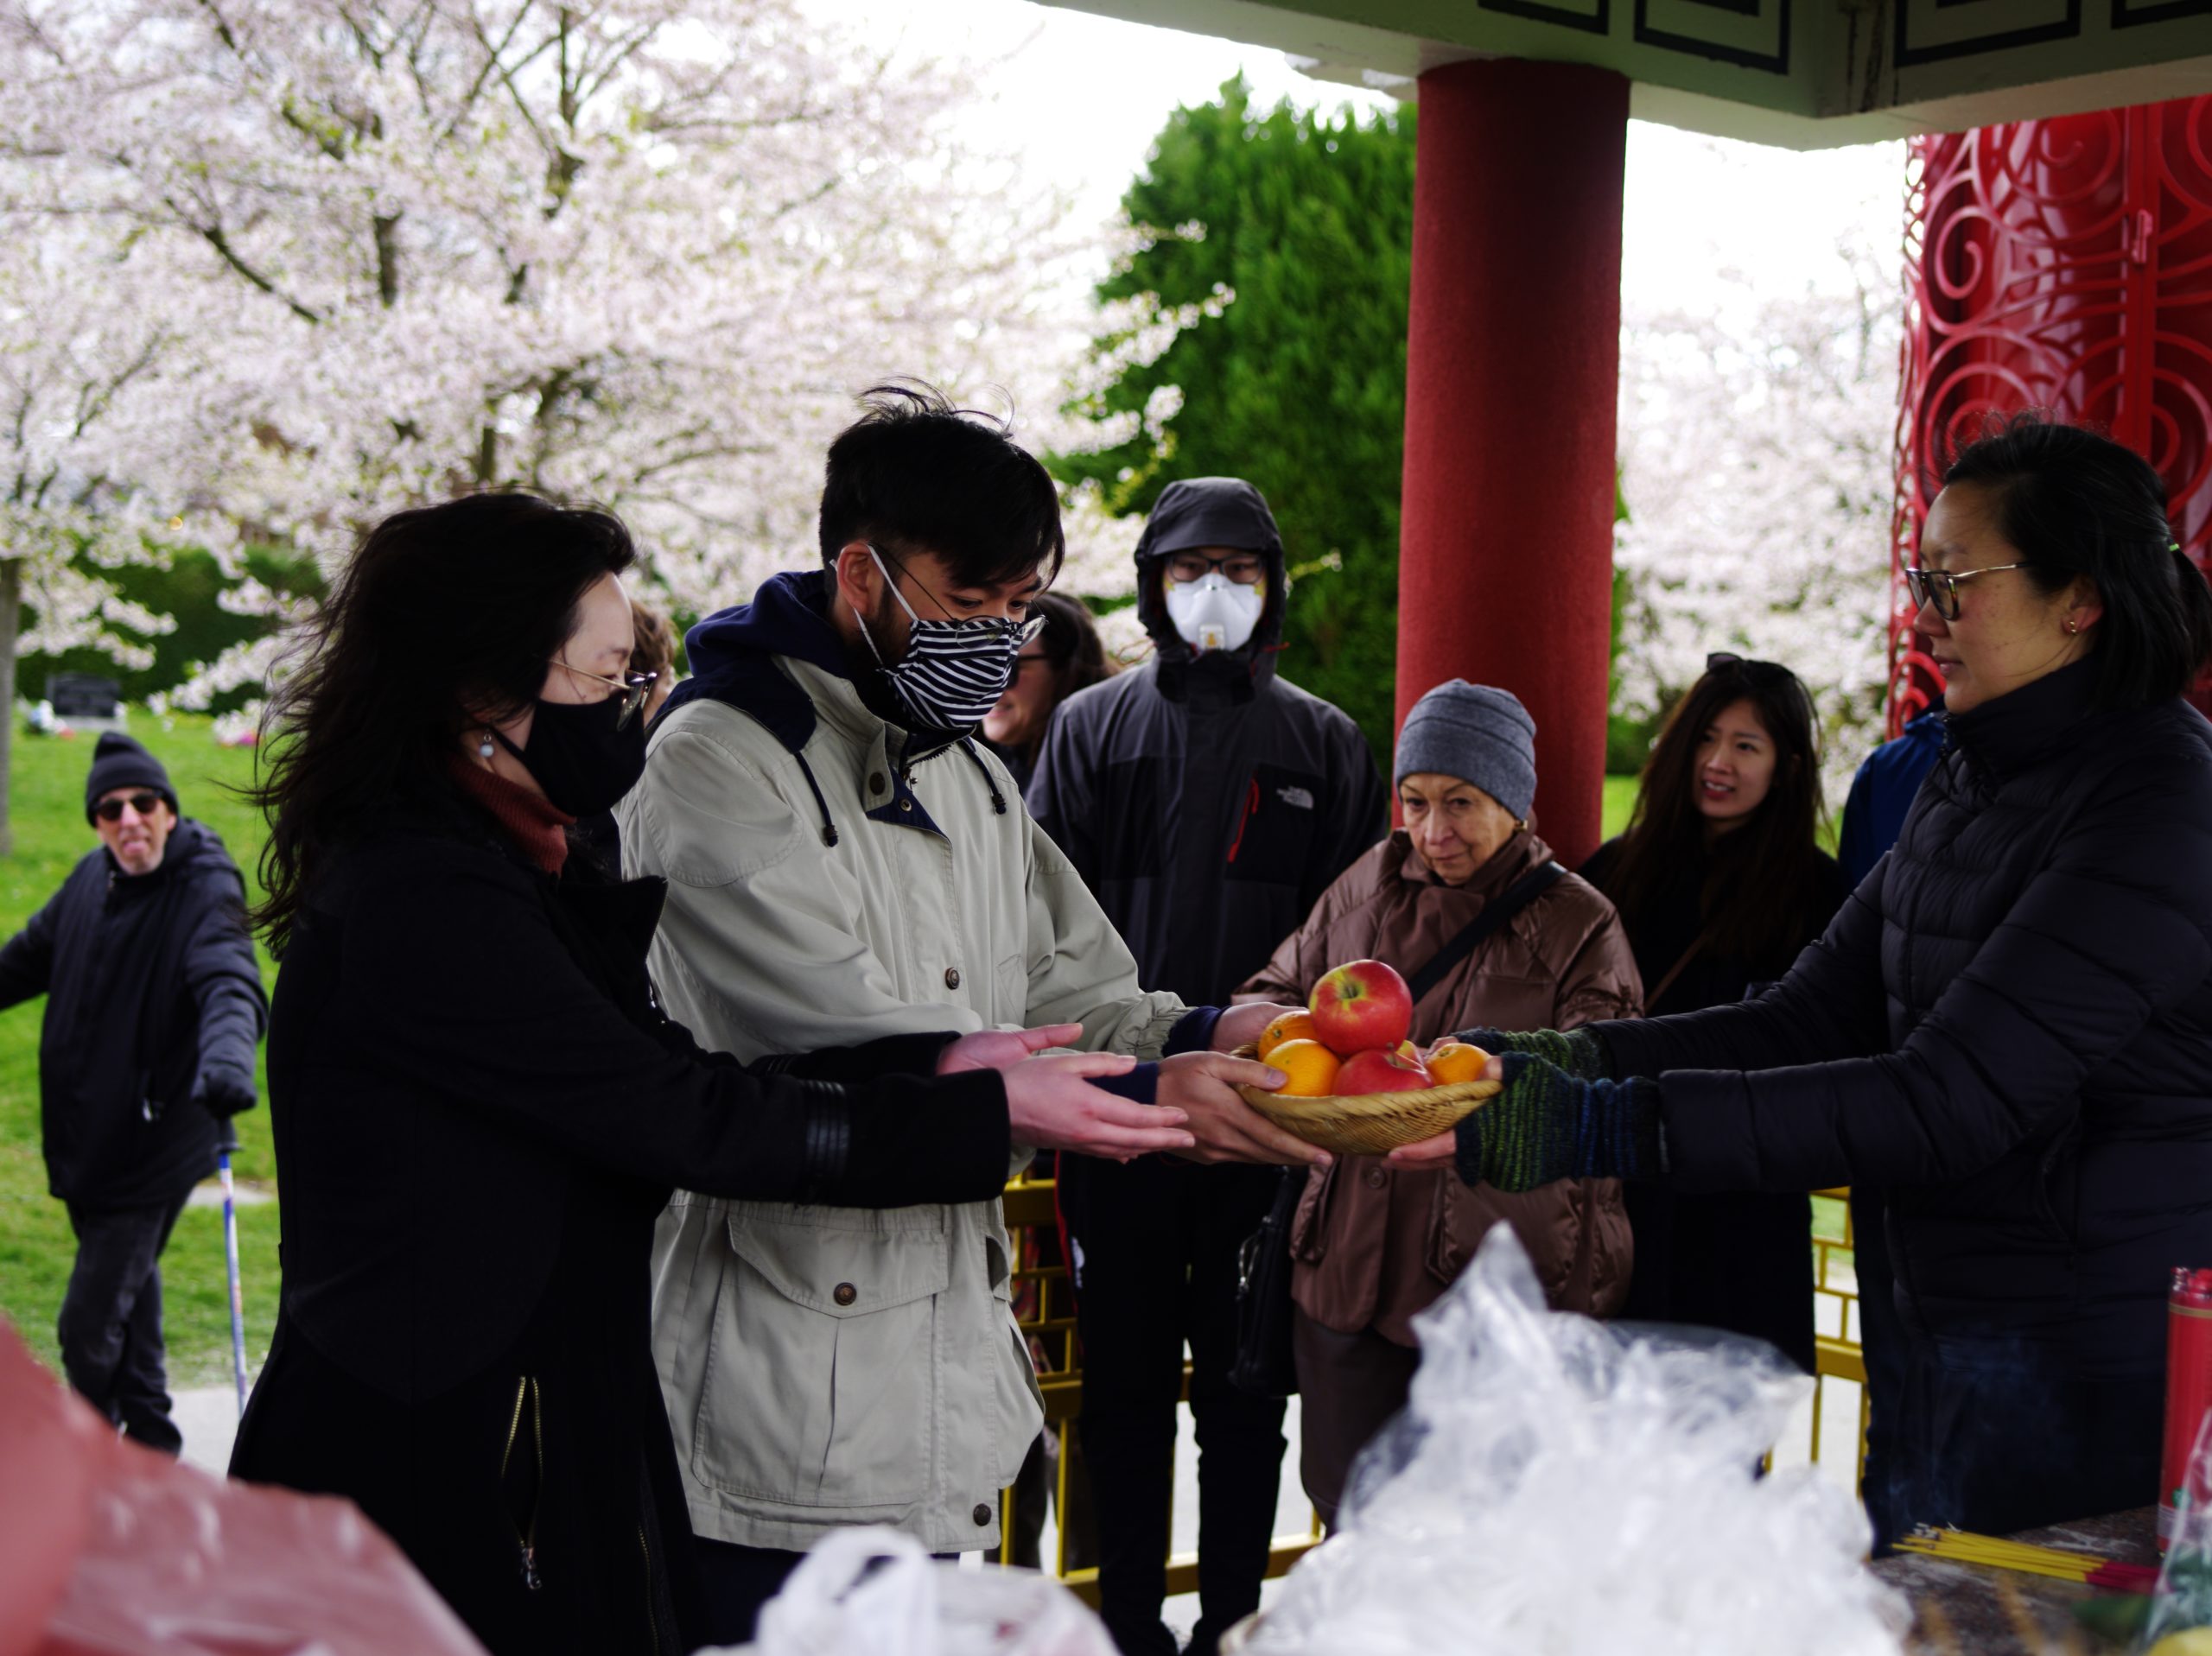 Image Description:Three people stand inside the Chinese Pavilion at Mountain View Cemetery. A person with black shoulder length hair and glasses is wearing a puffy jacket. They offer a woven bowl filled with apples and oranges to two other people. The two people stretch their arms out to receive the bowl with their bare hands. Three other people standing at the edge of the pavilion look on at the exchange of gifts. Other gifts for exchange are on the Altar in the foreground of the photograph.